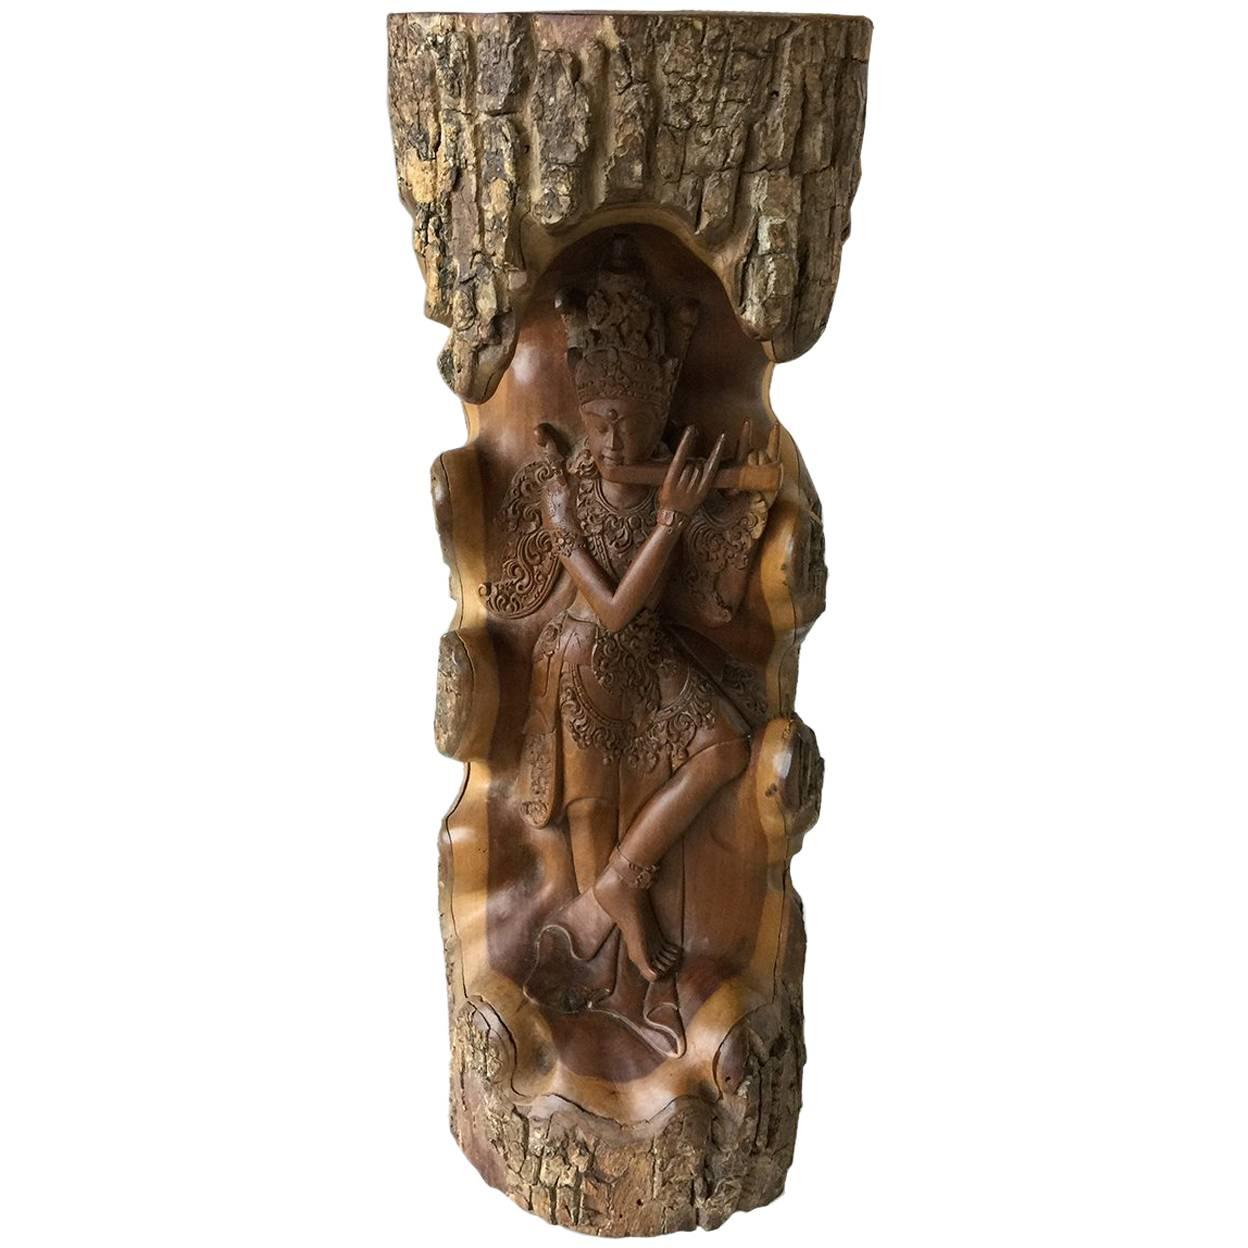 Hand-carved wooden statue with Lord Krishna from a piece of a tree For Sale